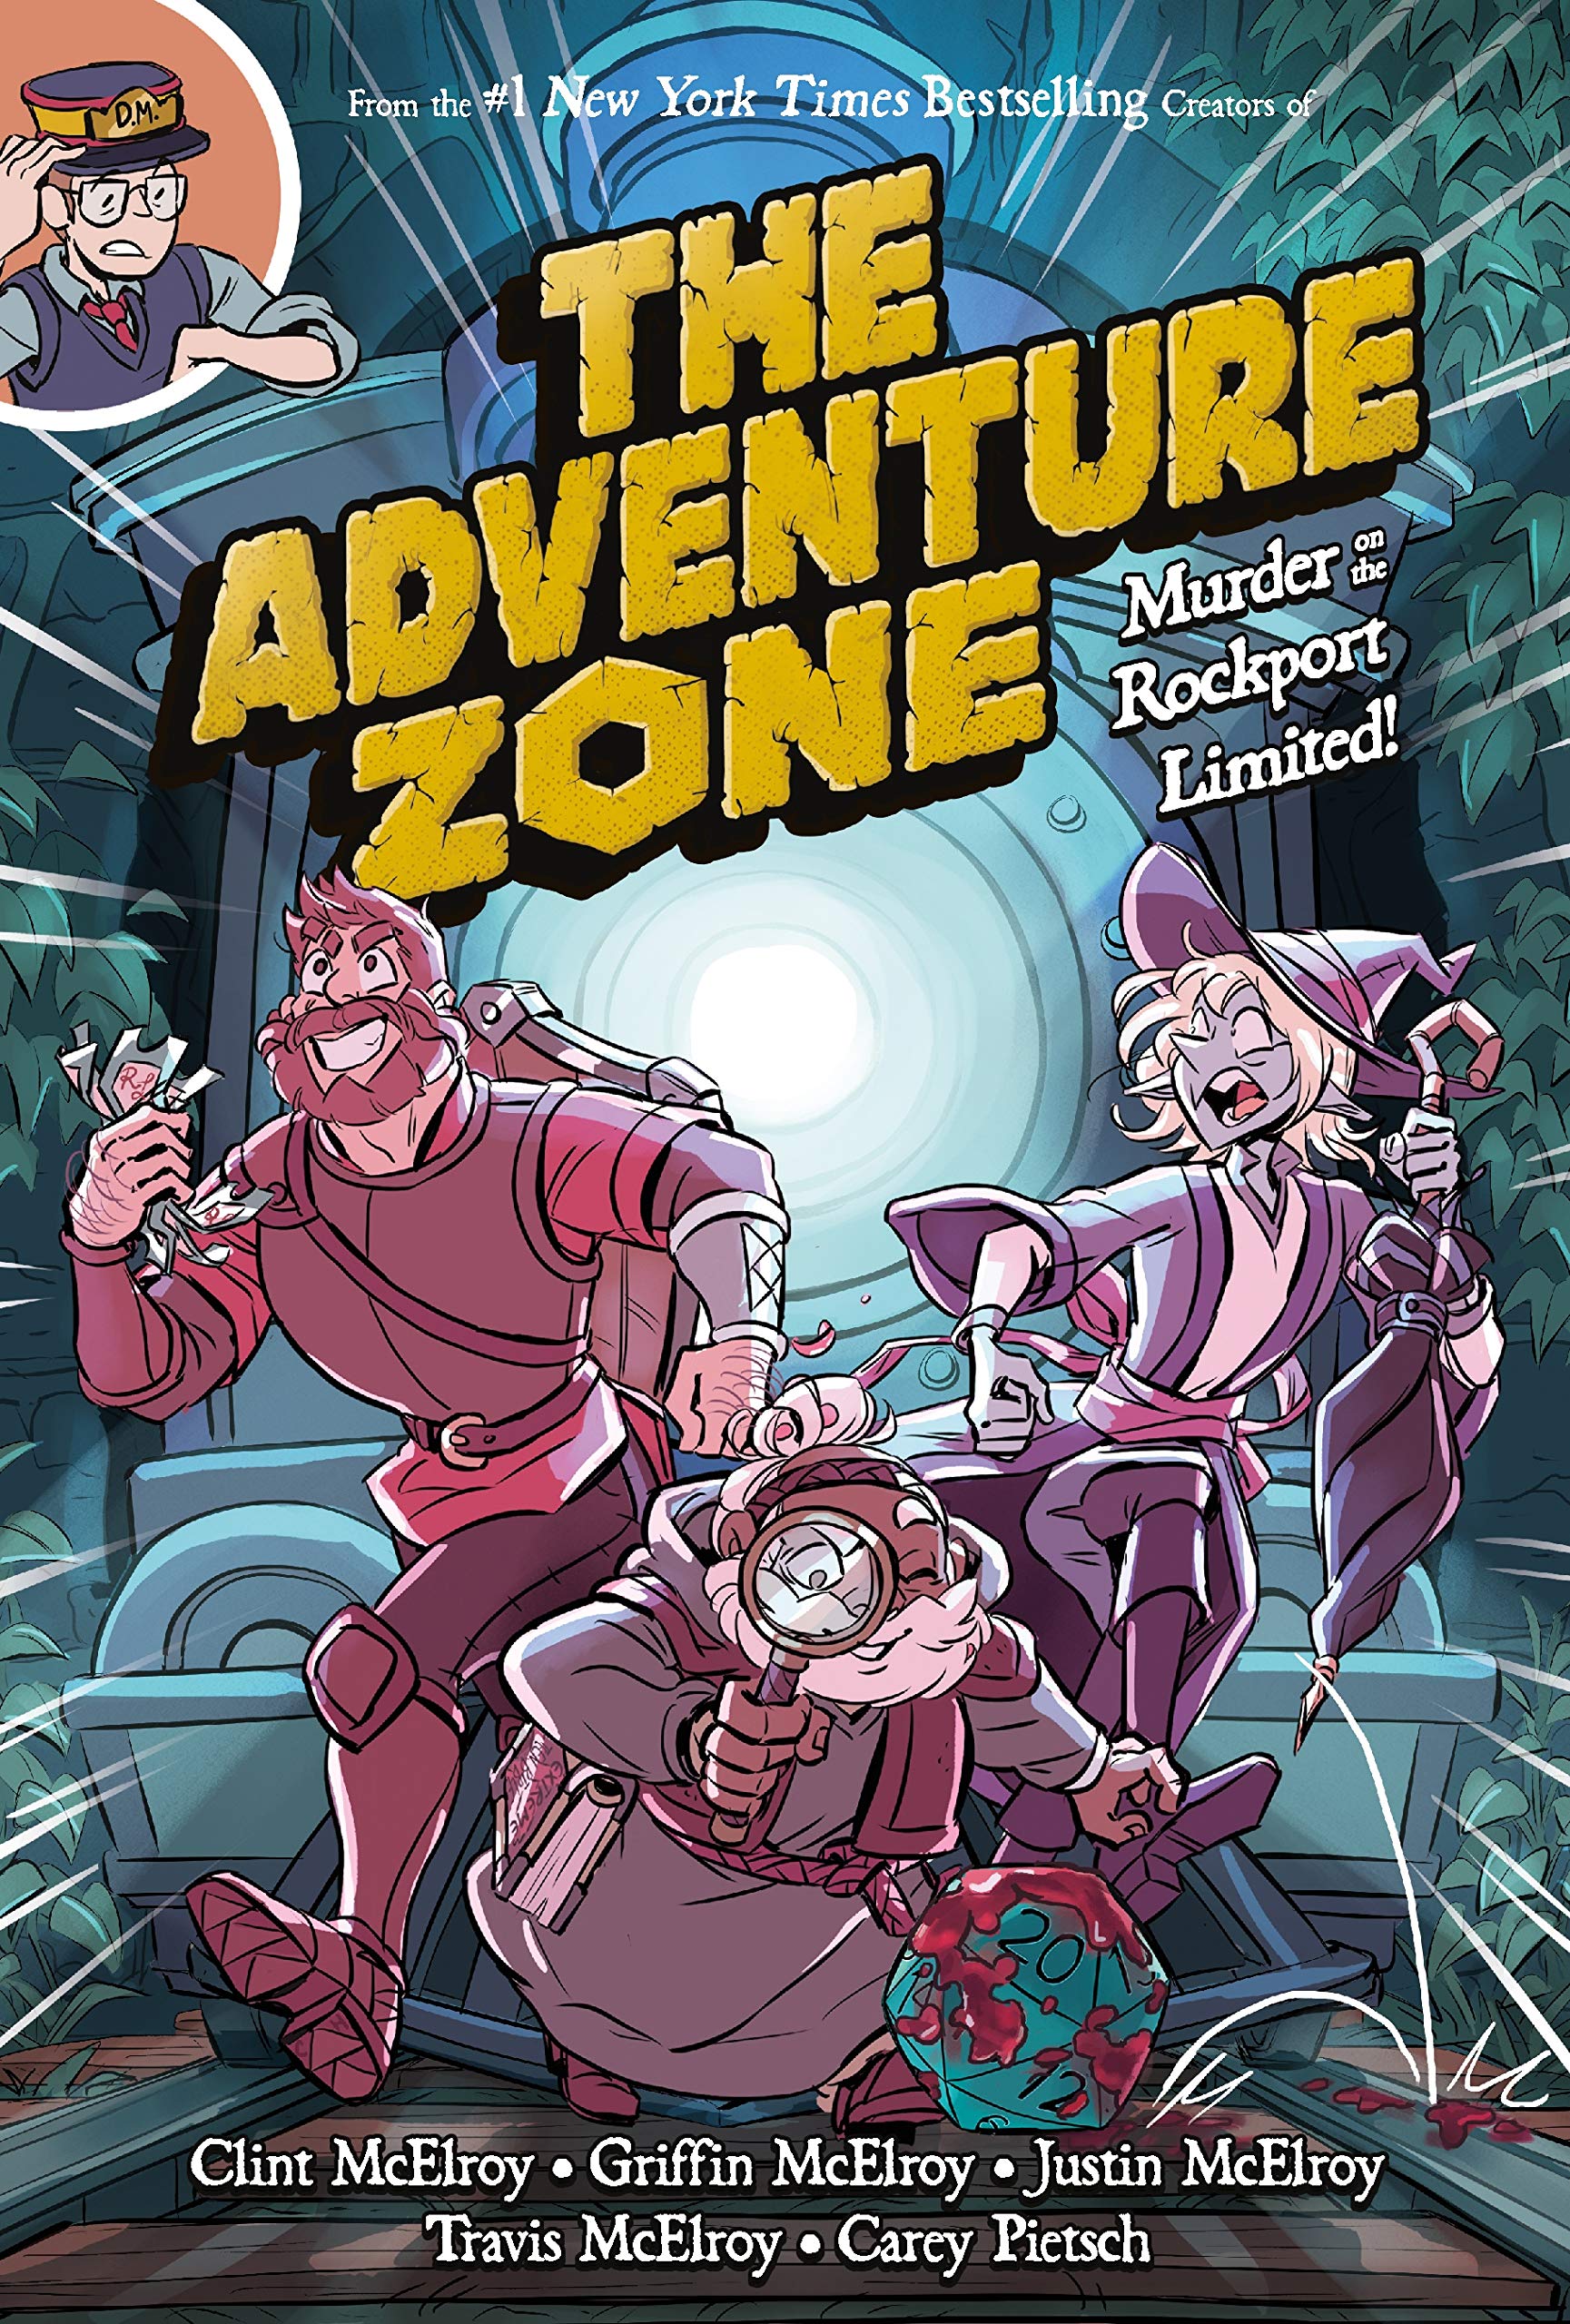 Carey Pietsch, Clint McElroy, Griffin McElroy, Justin McElroy, Travis McElroy: The Adventure Zone: Murder on the Rockport Limited! (GraphicNovel, 2019, First Second)